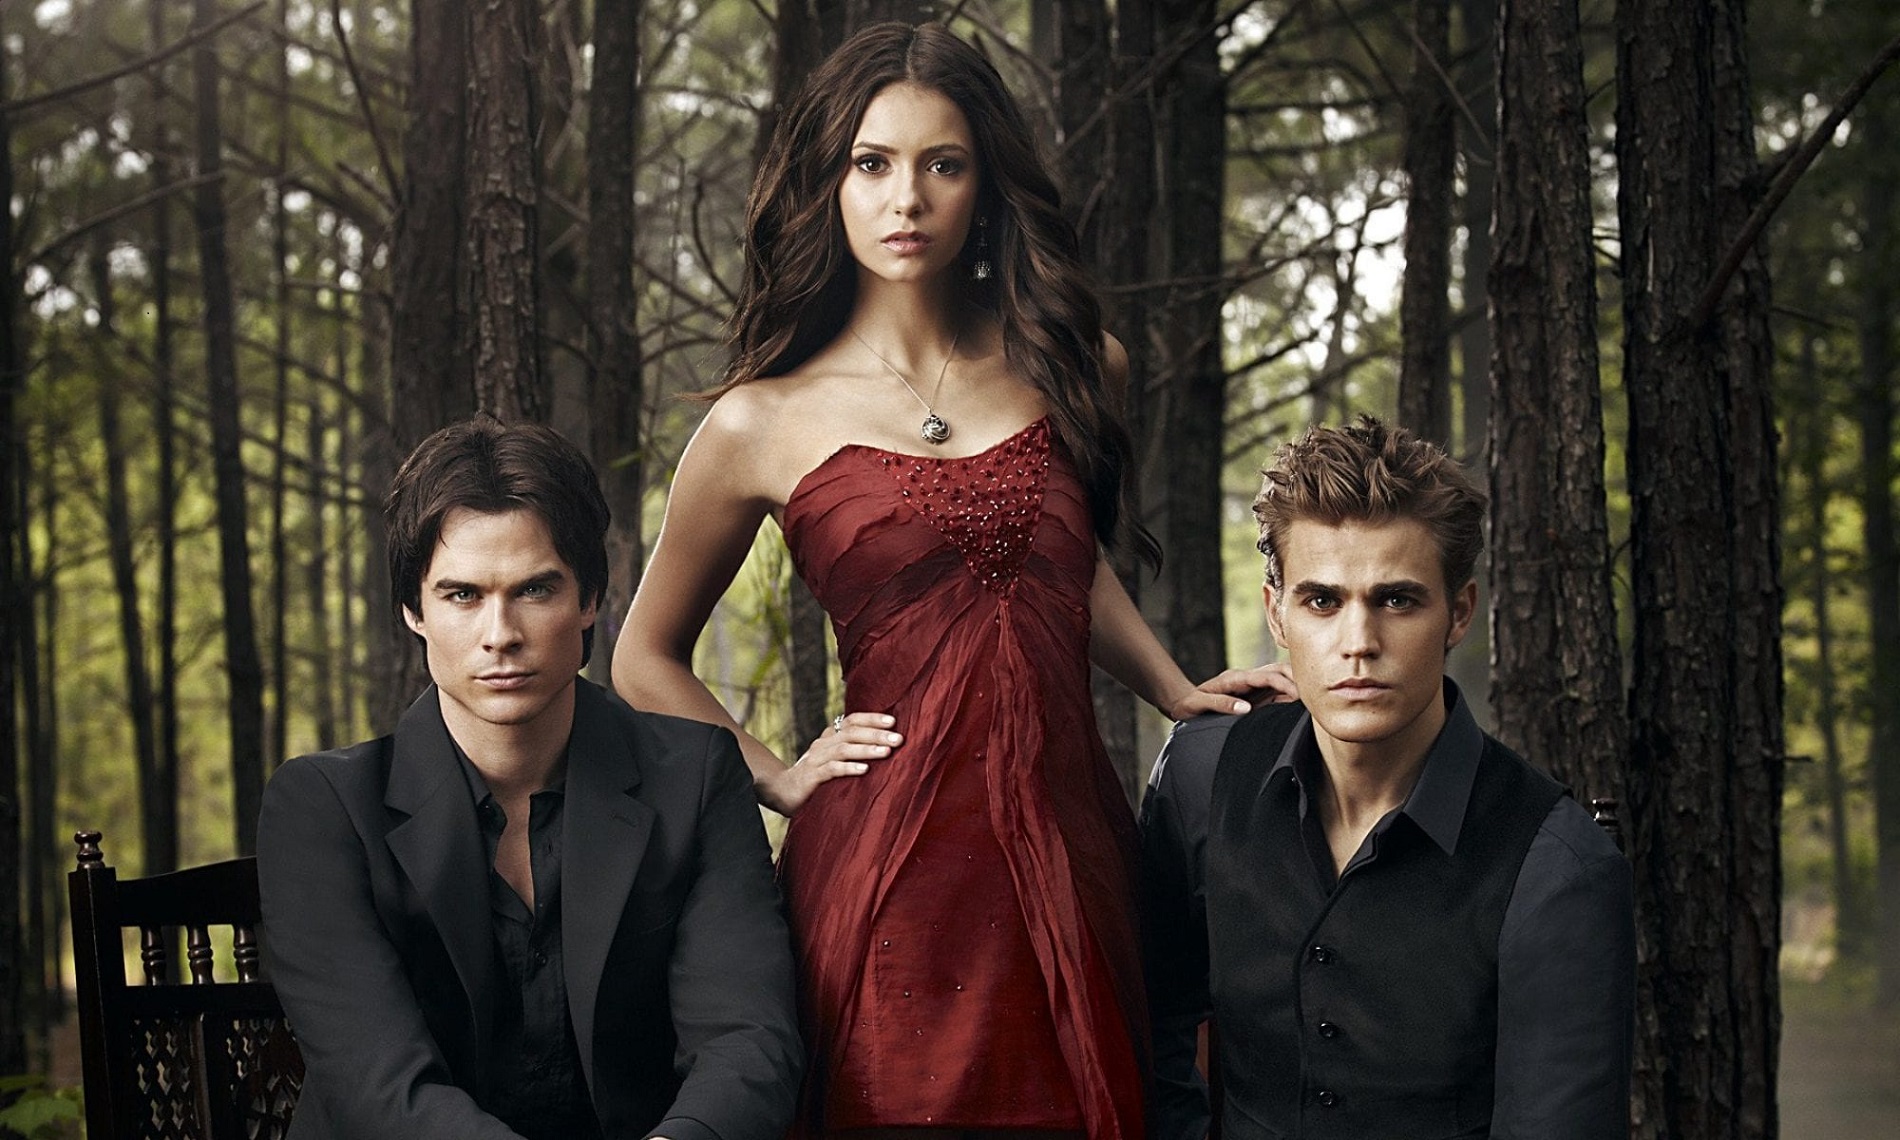 Is The Vampire Diaries Coming Back With Season 9? Air Date, Cast, And